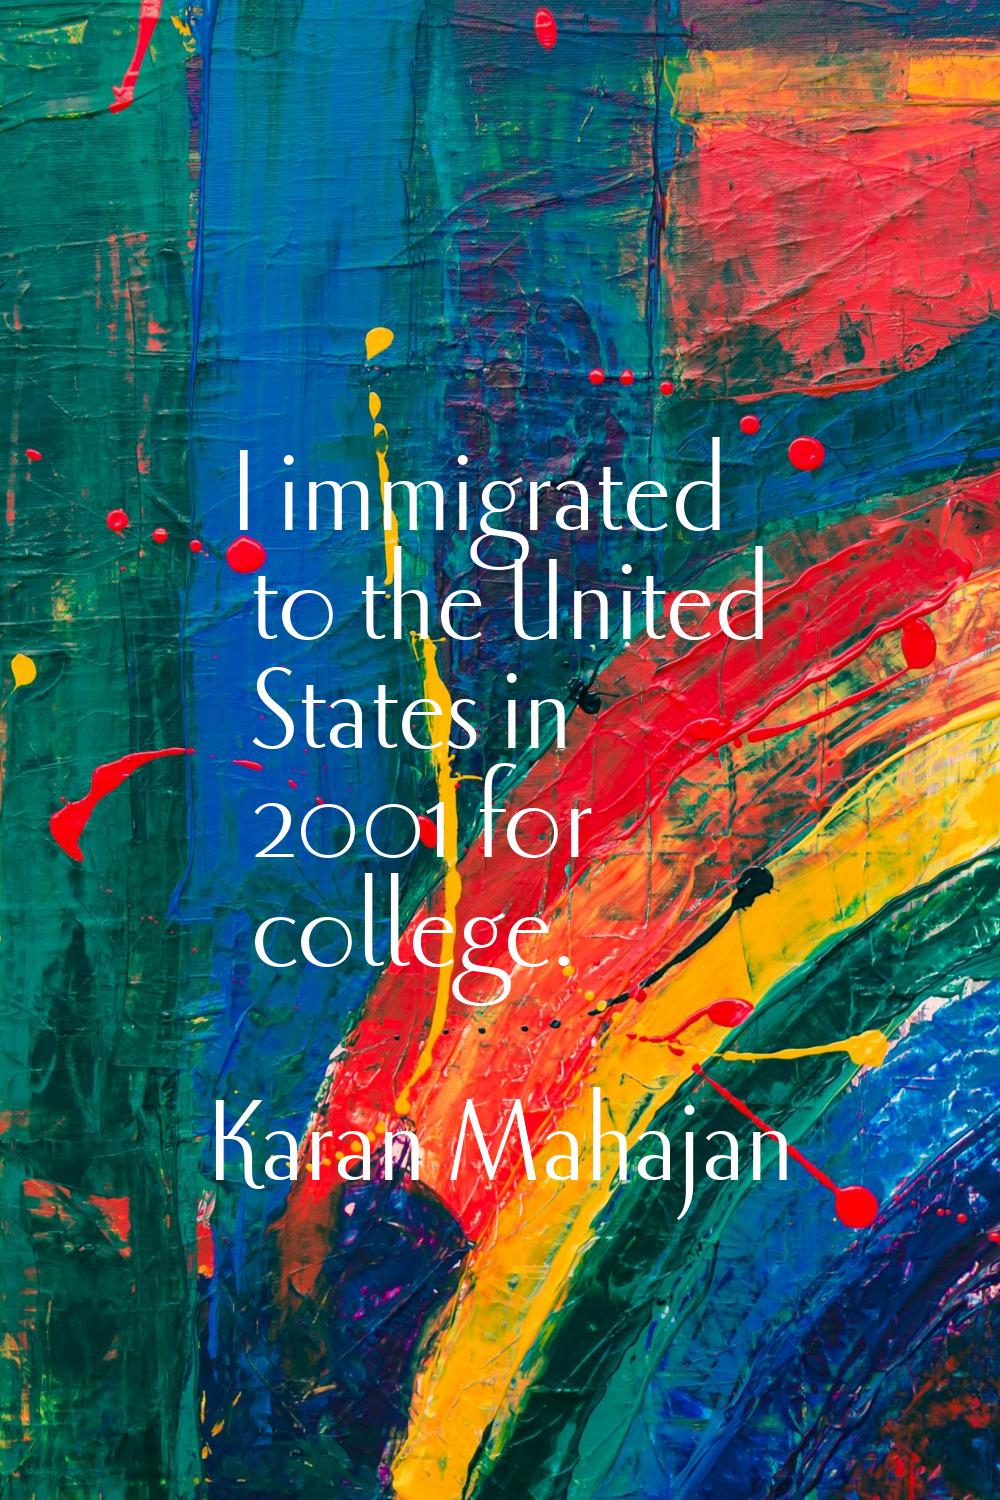 I immigrated to the United States in 2001 for college.